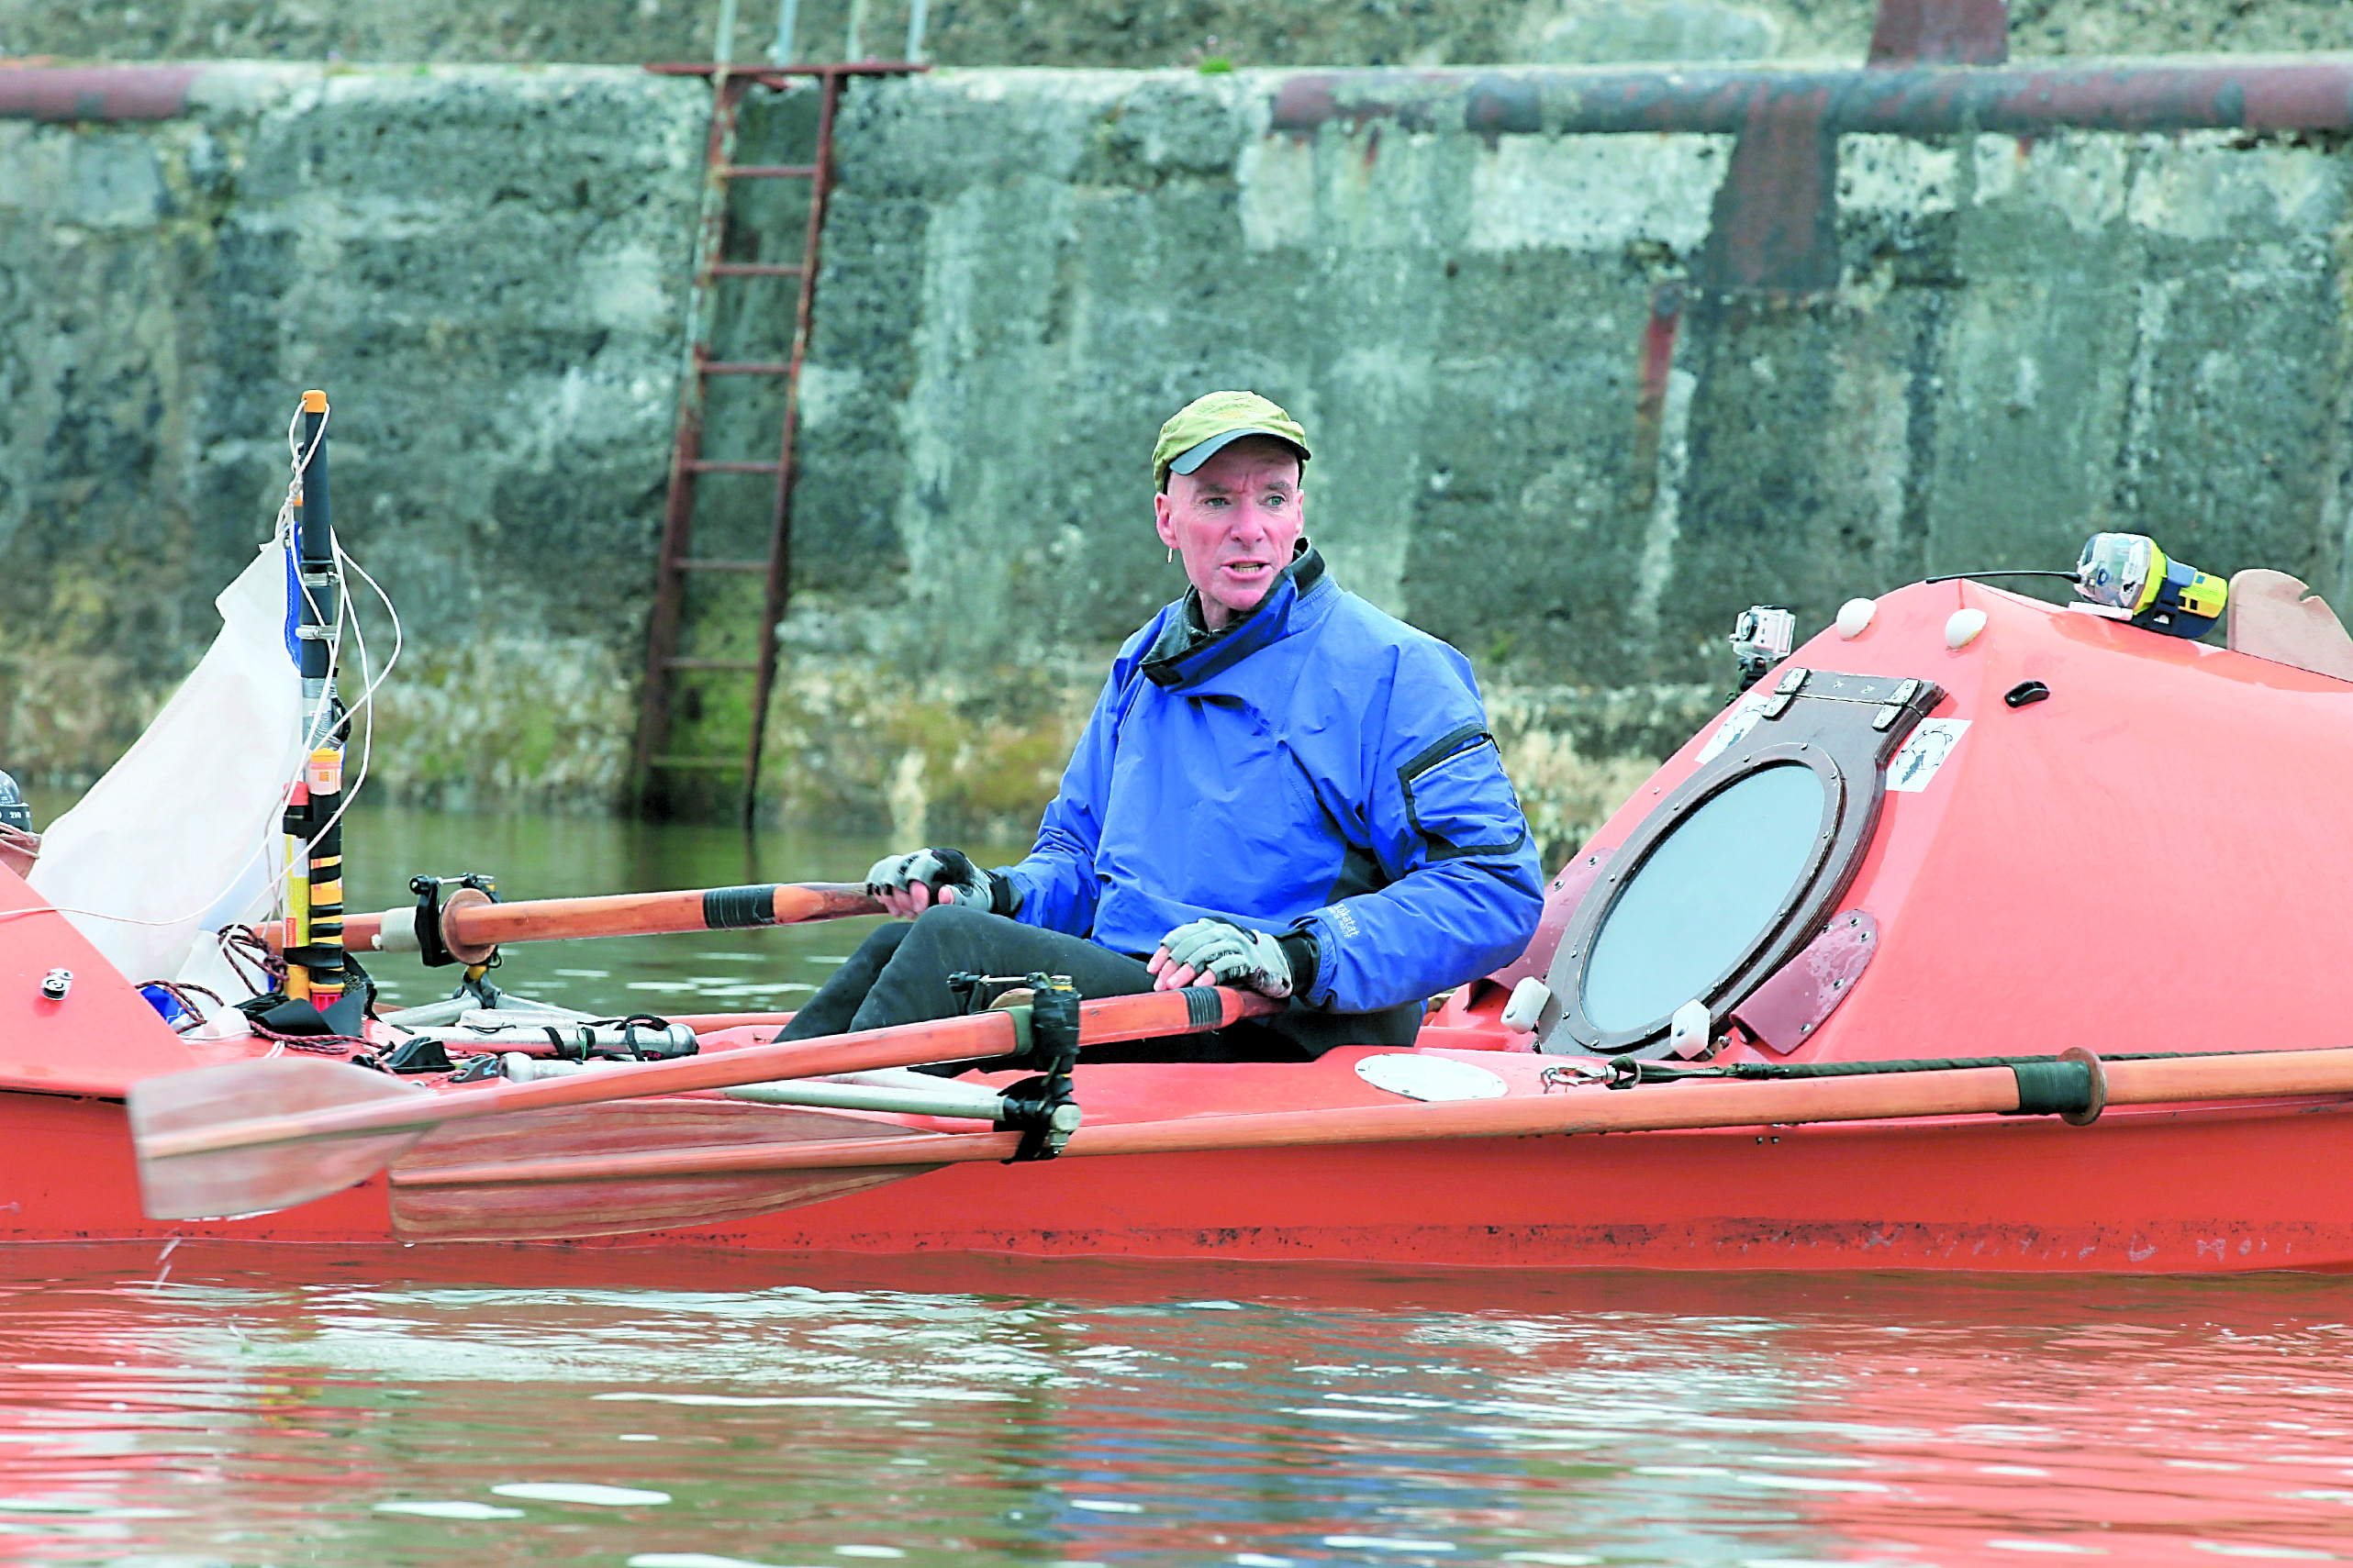 Port Angeles adventurer Chris Duff is seen preparing for his journey from Scotland to Iceland on his boat